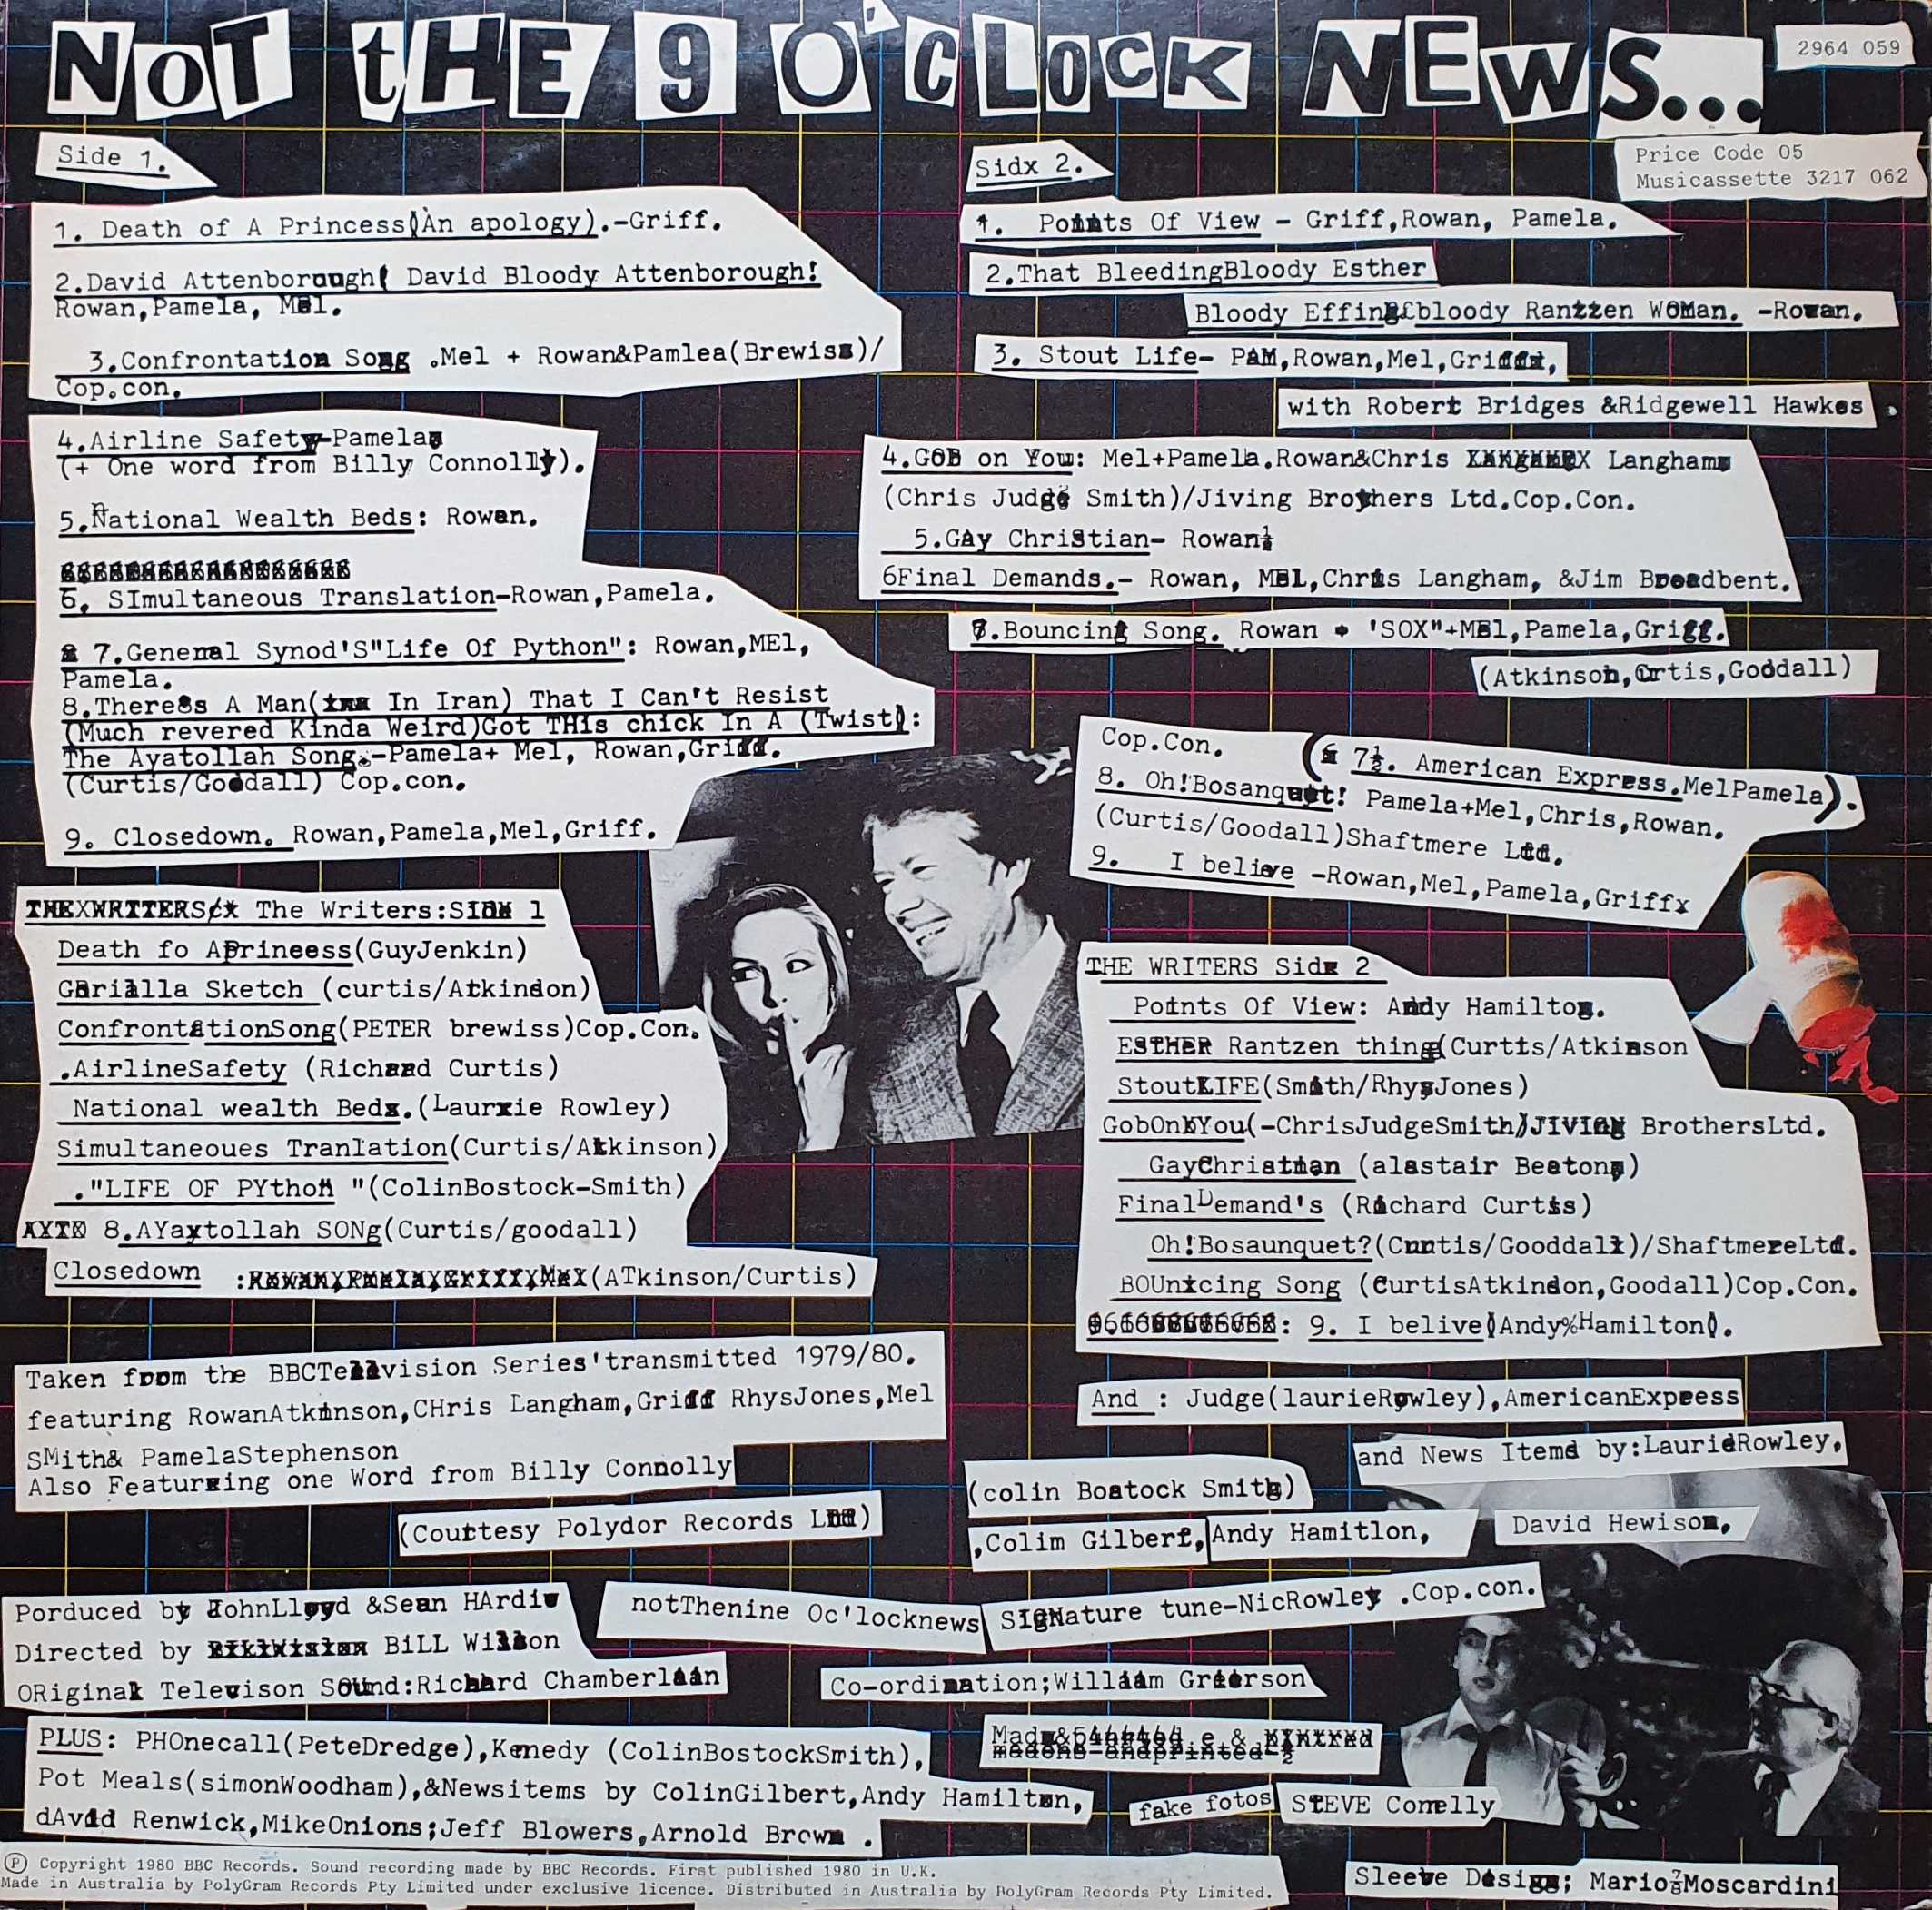 Picture of 2964 059 Not the nine o'clock news by artist Not the nine o'clock news from the BBC records and Tapes library